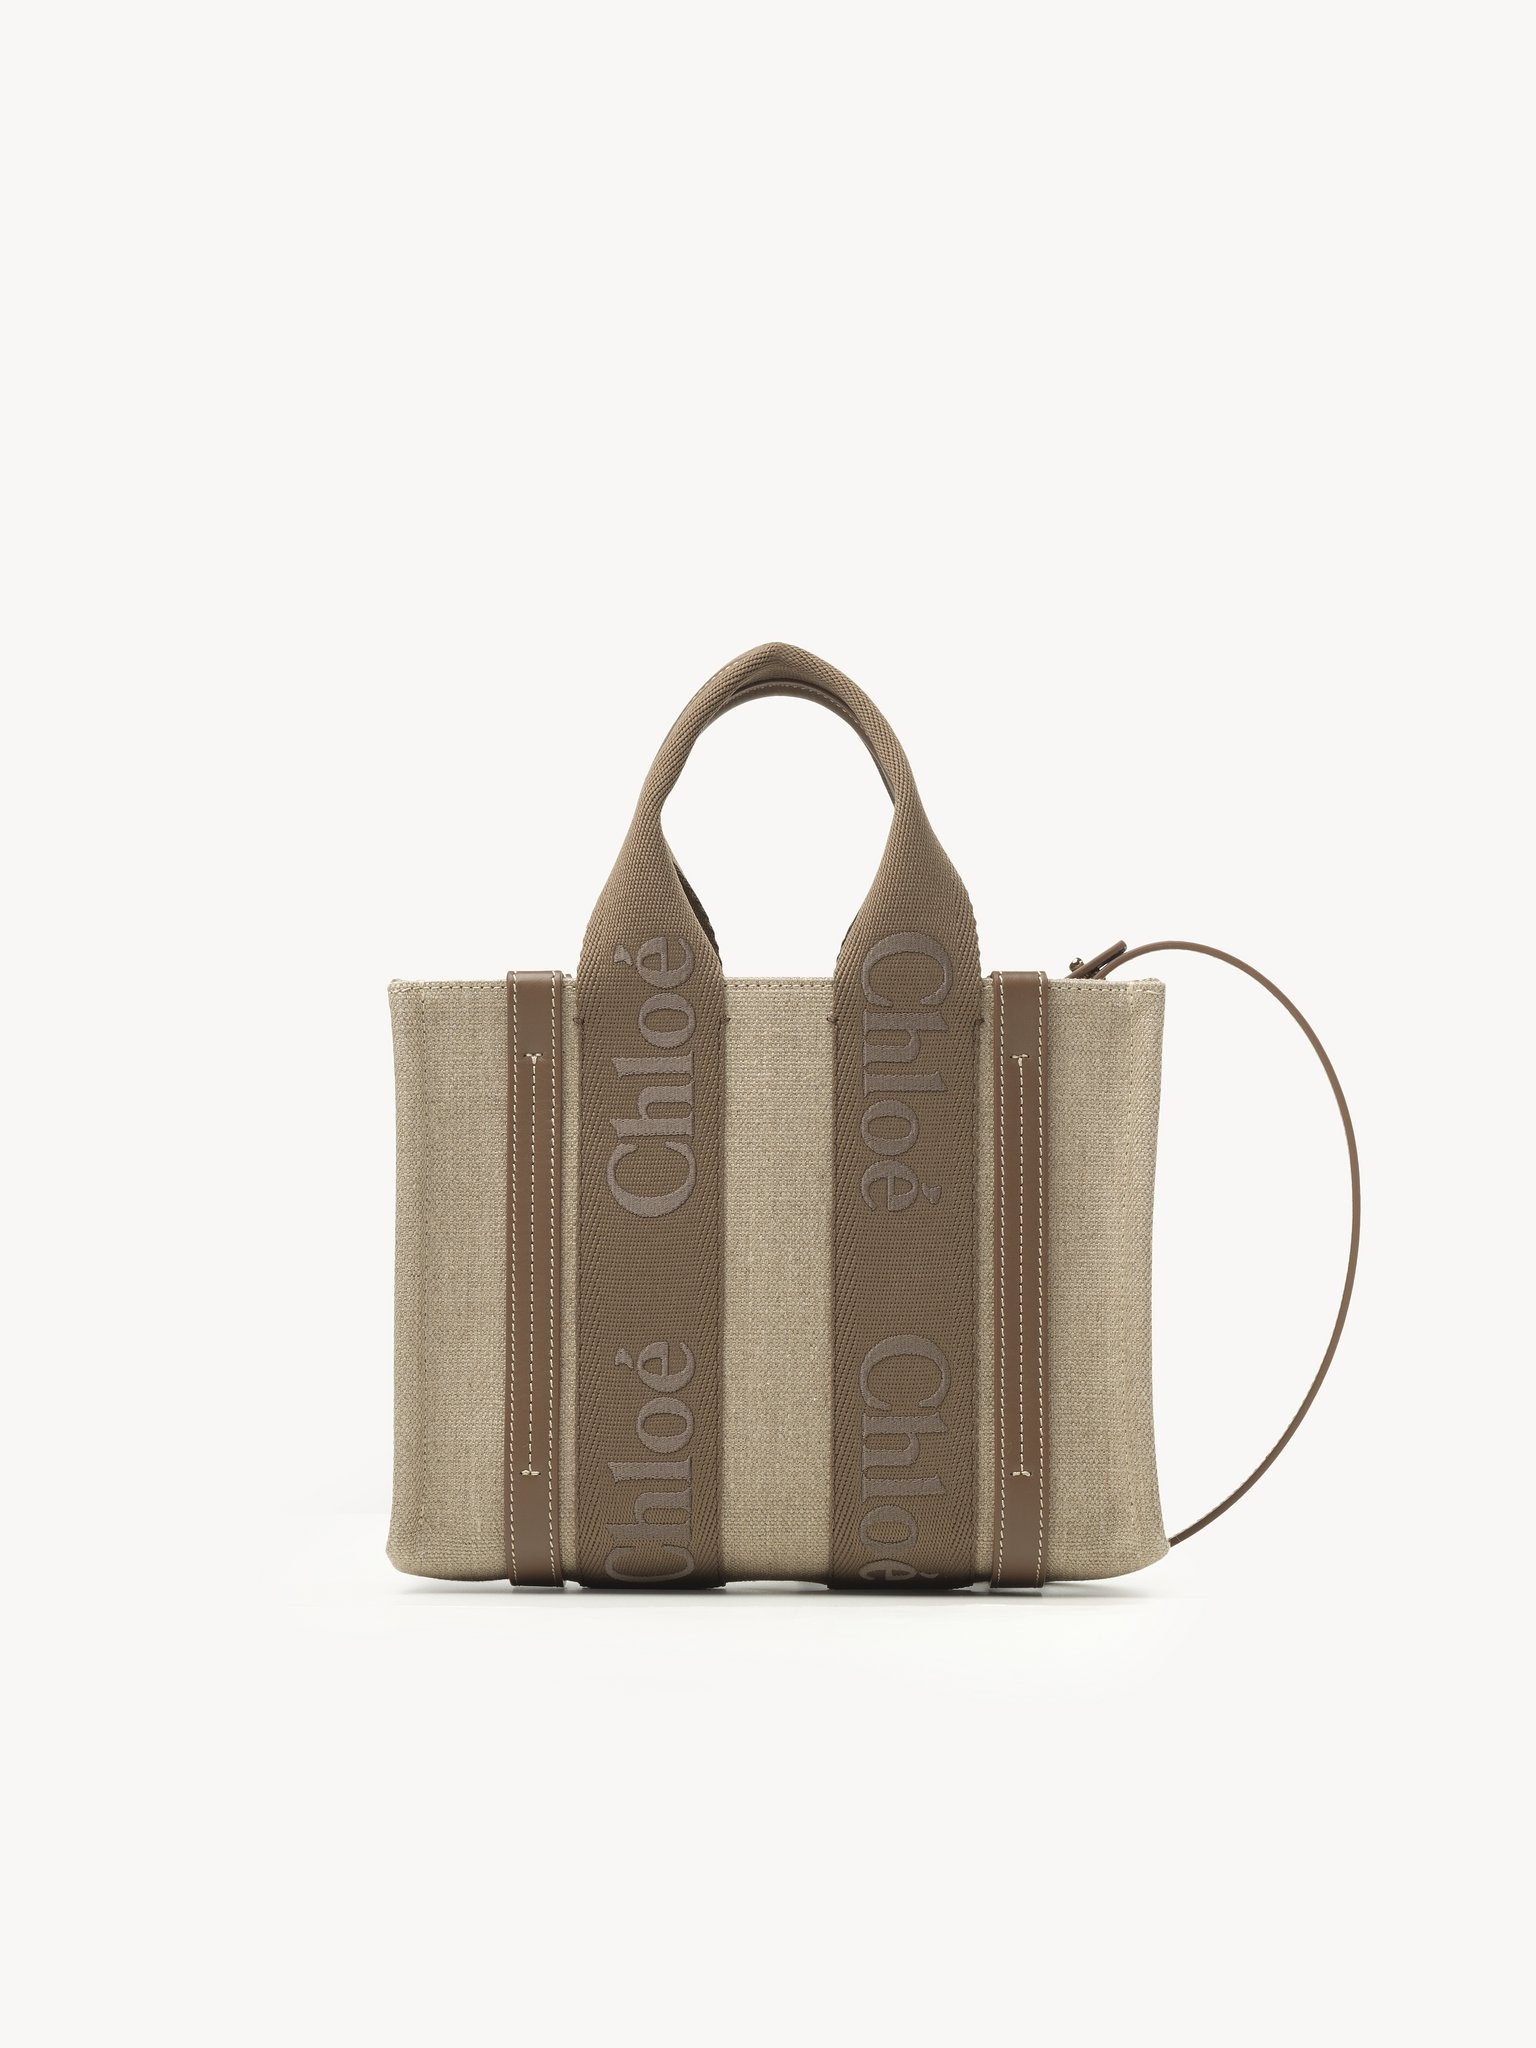 SMALL WOODY TOTE BAG IN LINEN - 1